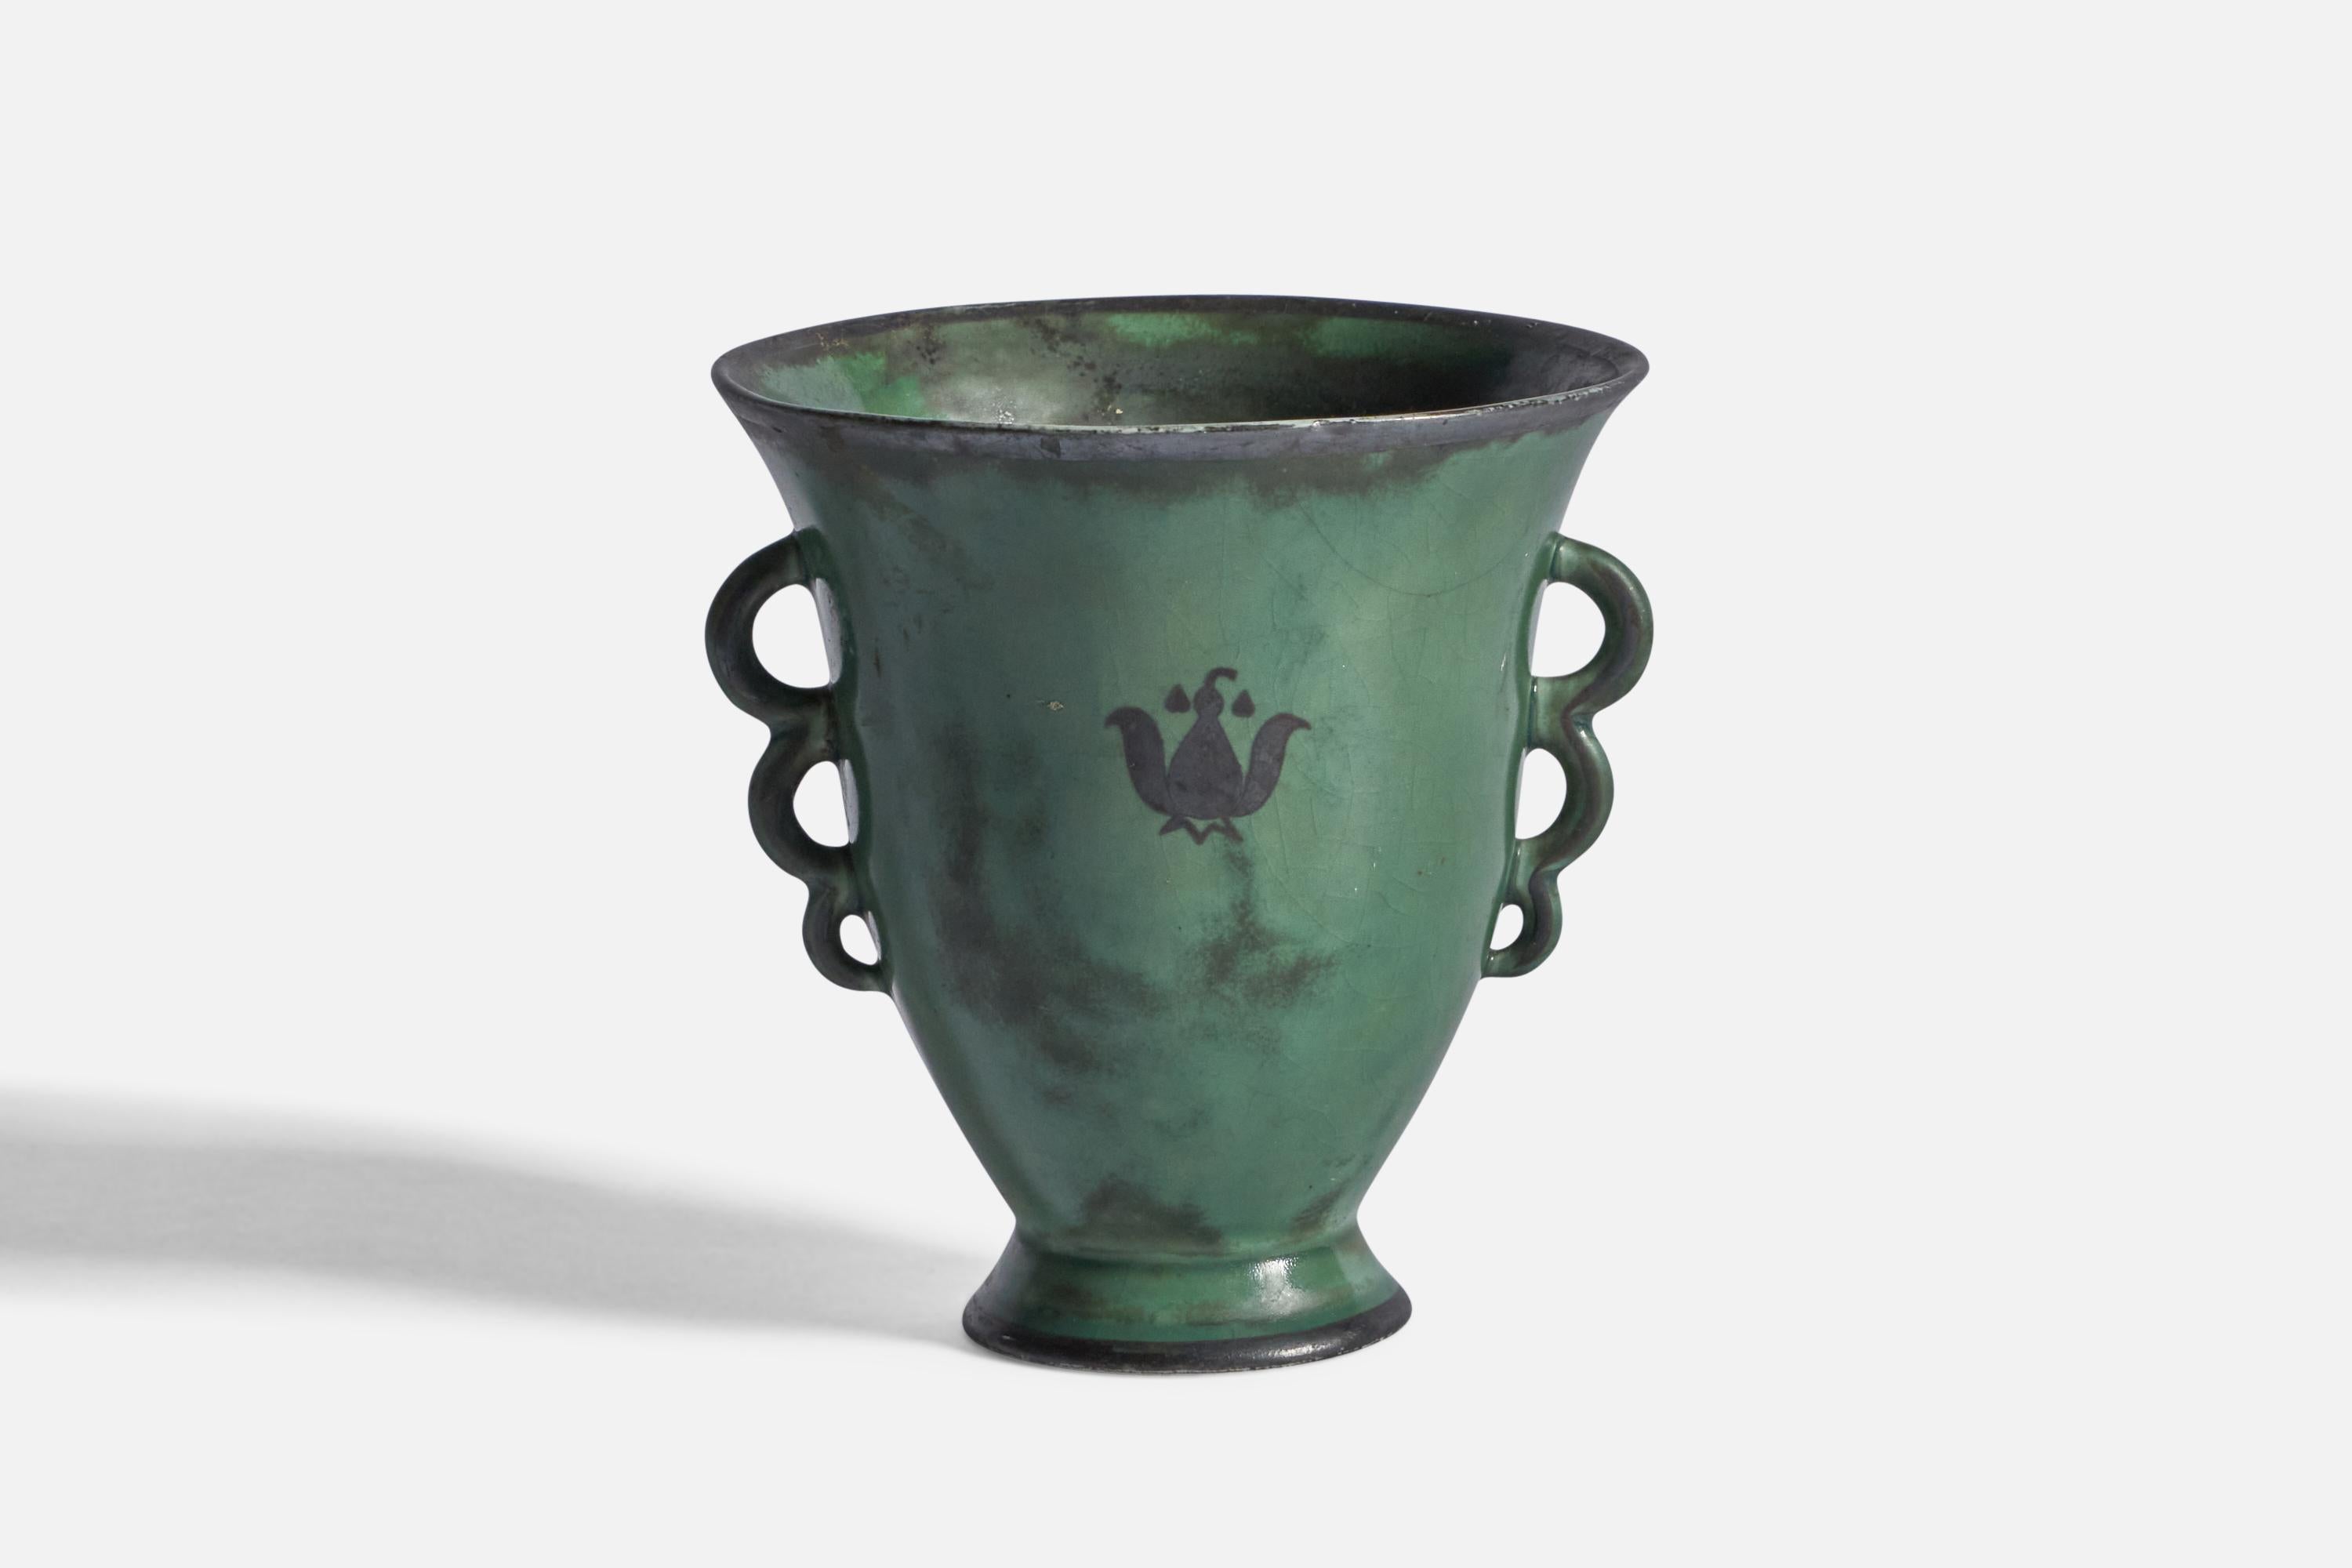 A green-glazed stoneware vase designed and produced by Arabia, Finland, c. 1940s.